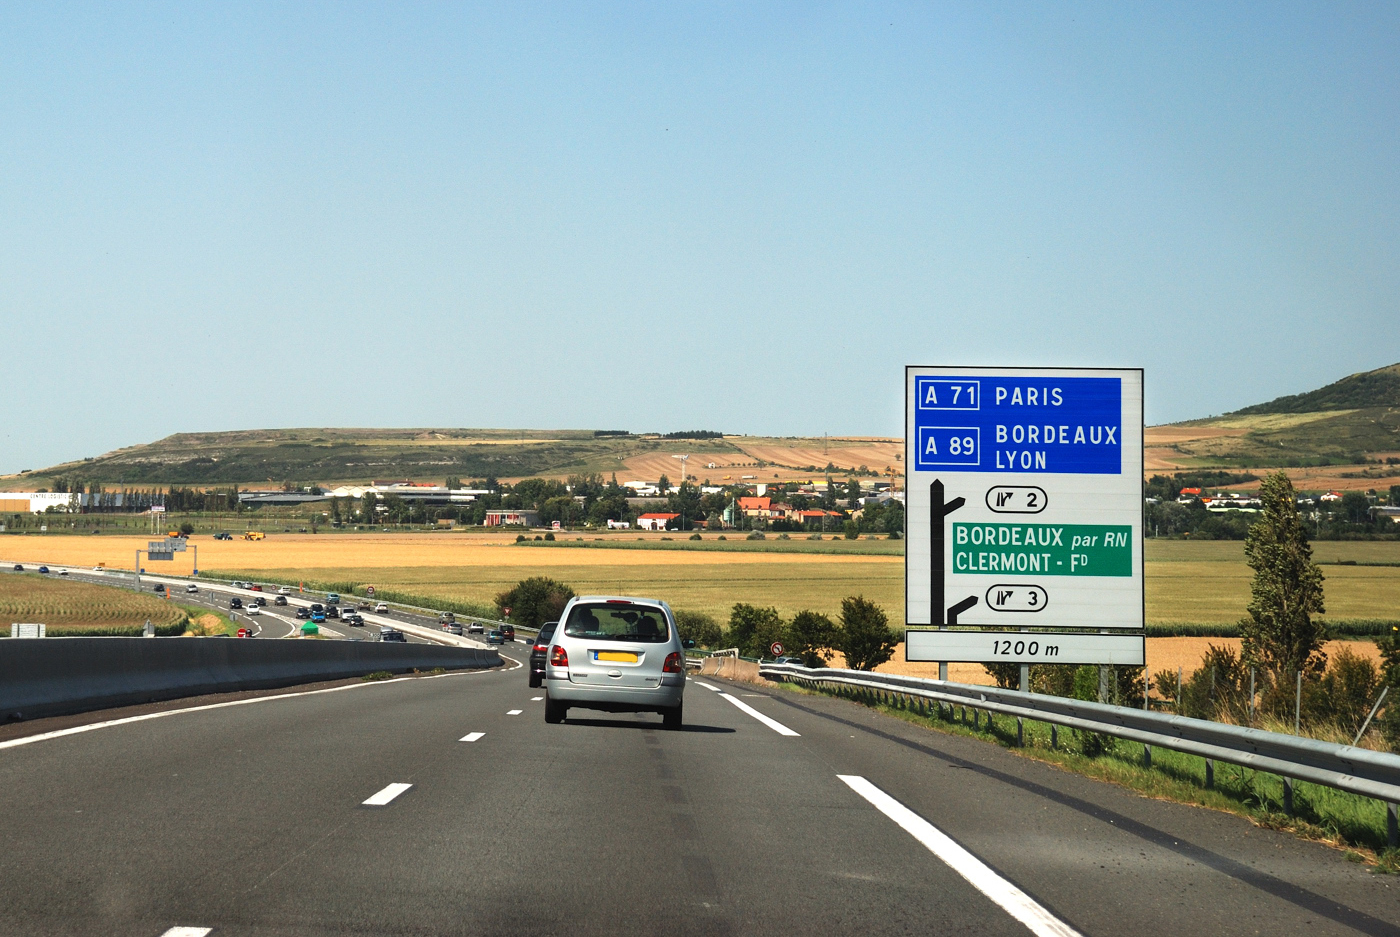 A75 © Romary - licence [CC BY-SA 3.0] from Wikimedia Commons